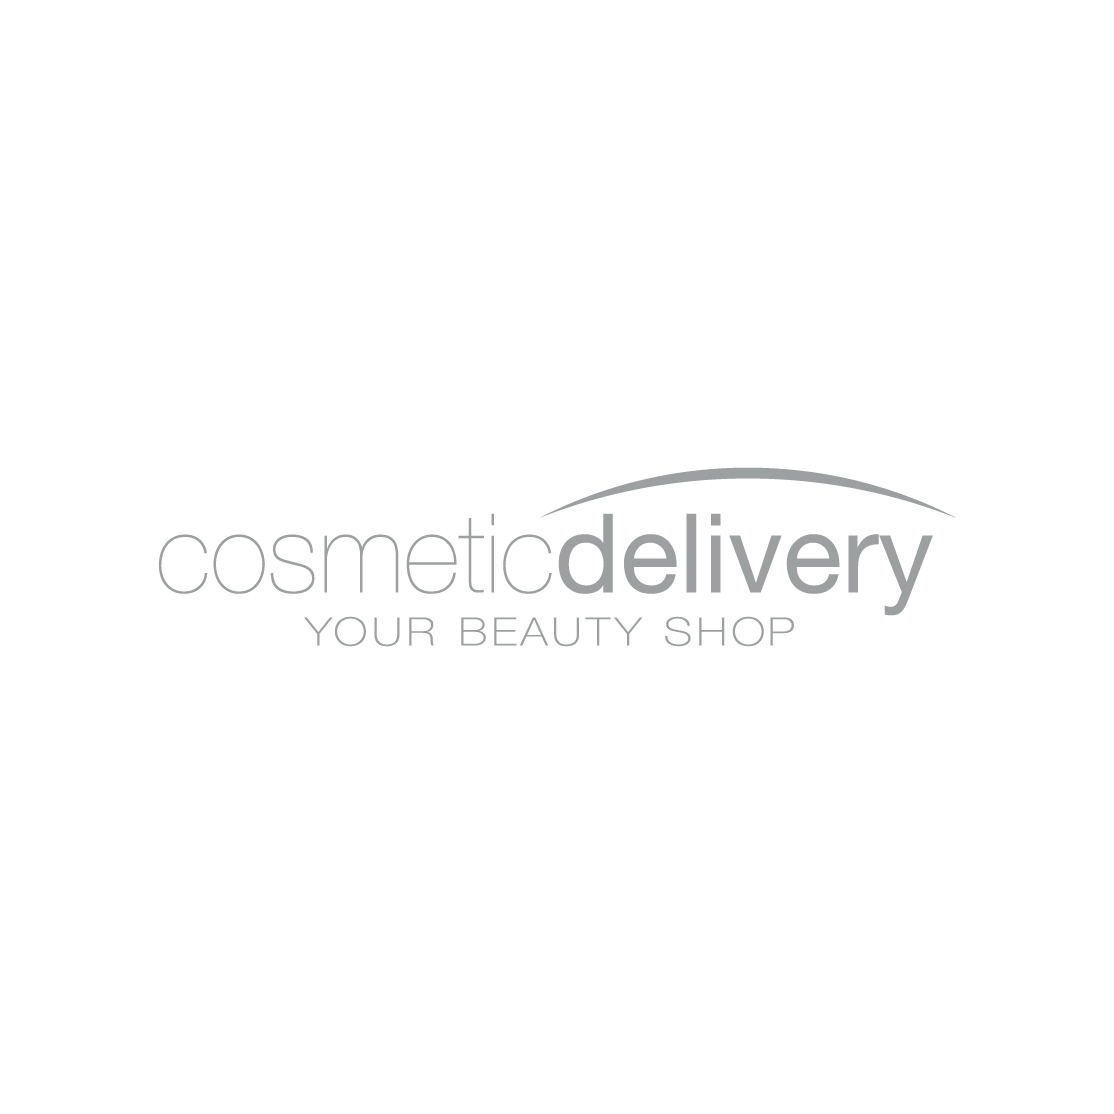 Cosmetic Delivery